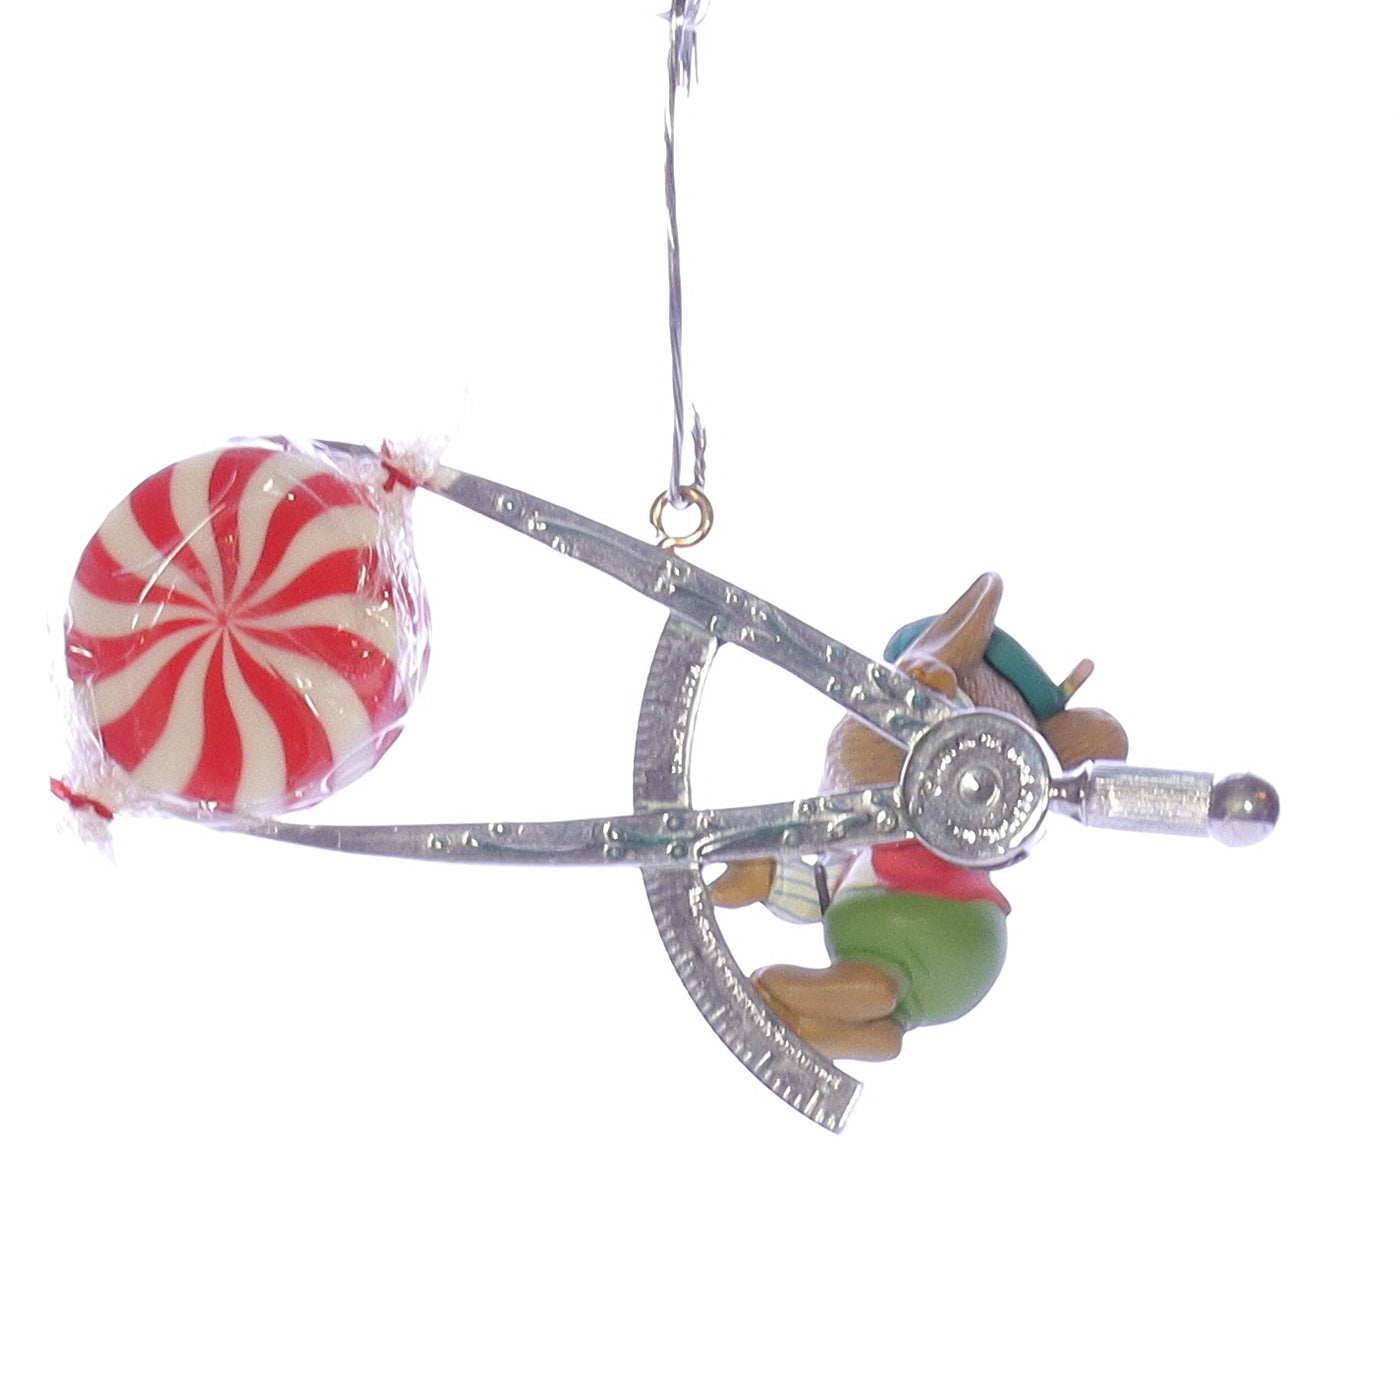 Enesco_Treasury_of_Christmas_Ornaments_583677_Merry_Millimeter_Mouse_Ornament_1993 Back Right View